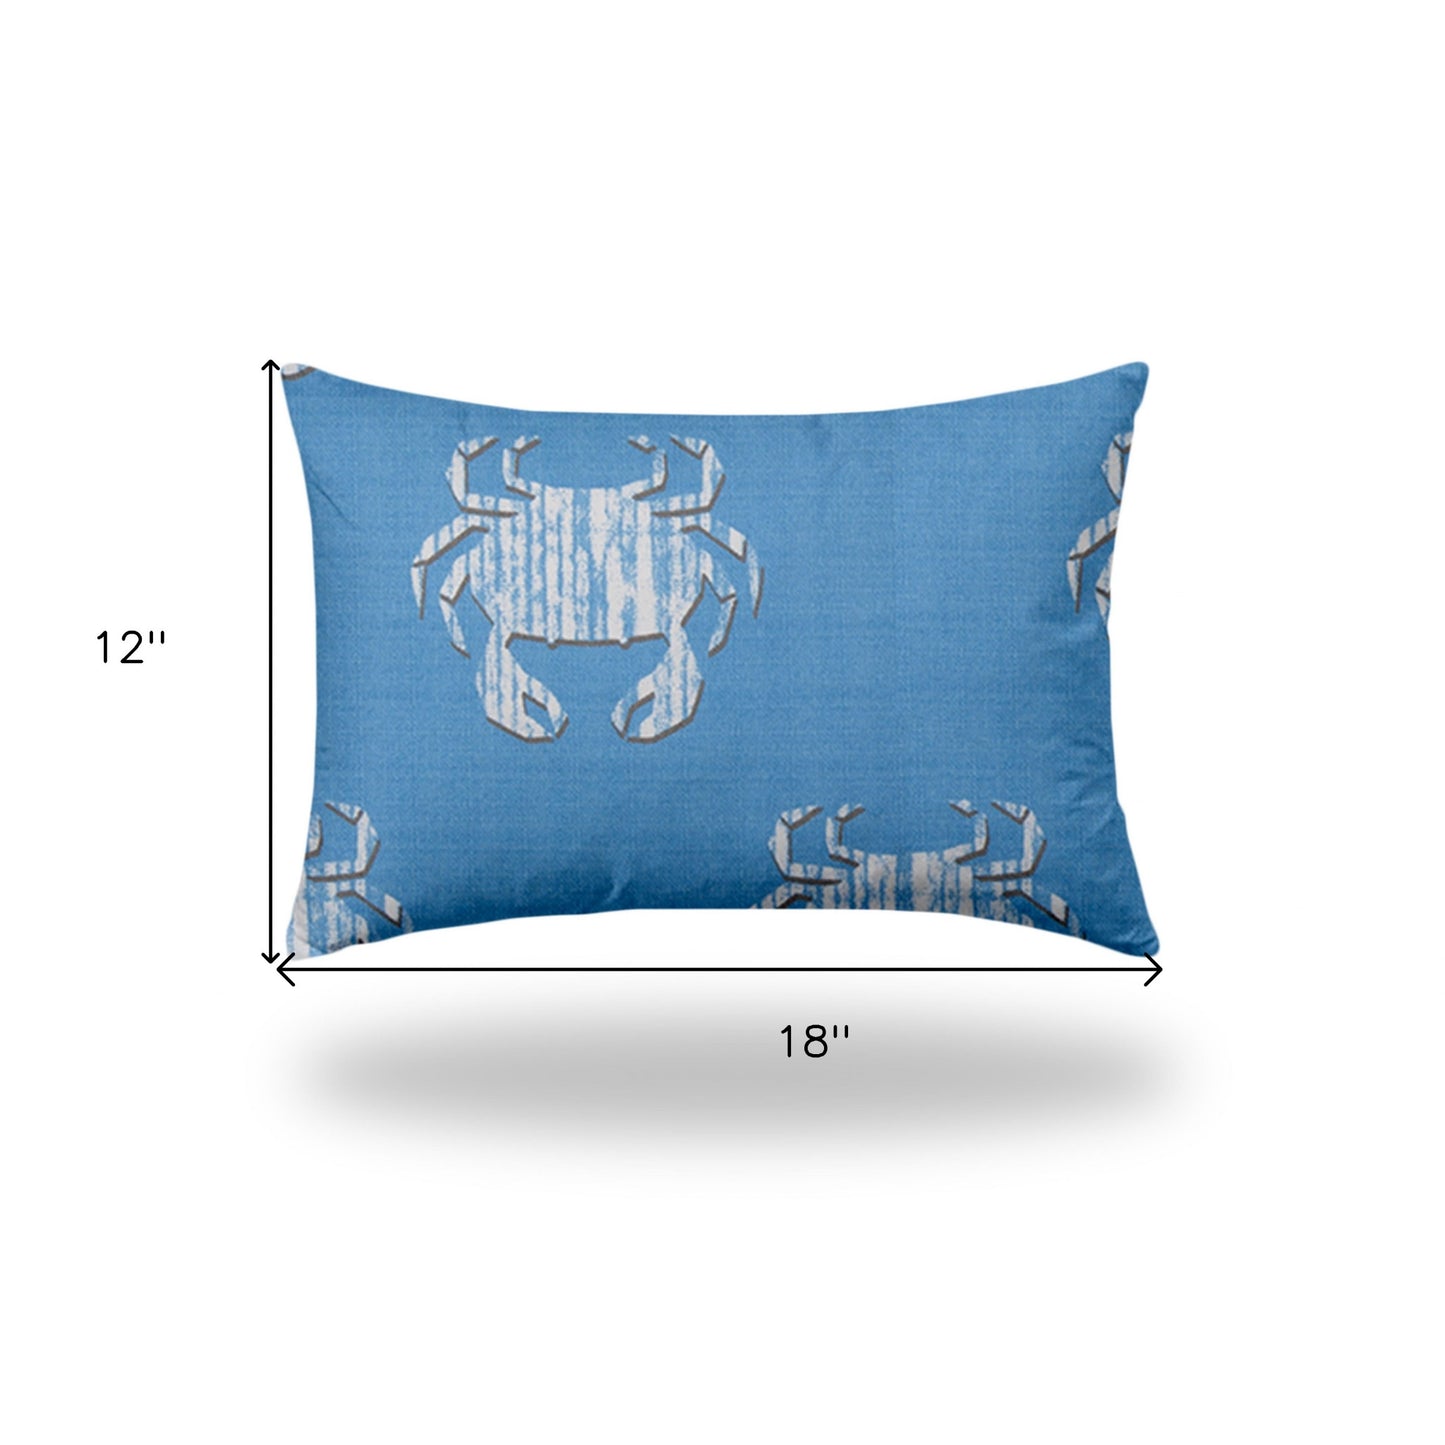 12" X 18" Blue And White Crab Zippered Lumbar Indoor Outdoor Pillow Cover